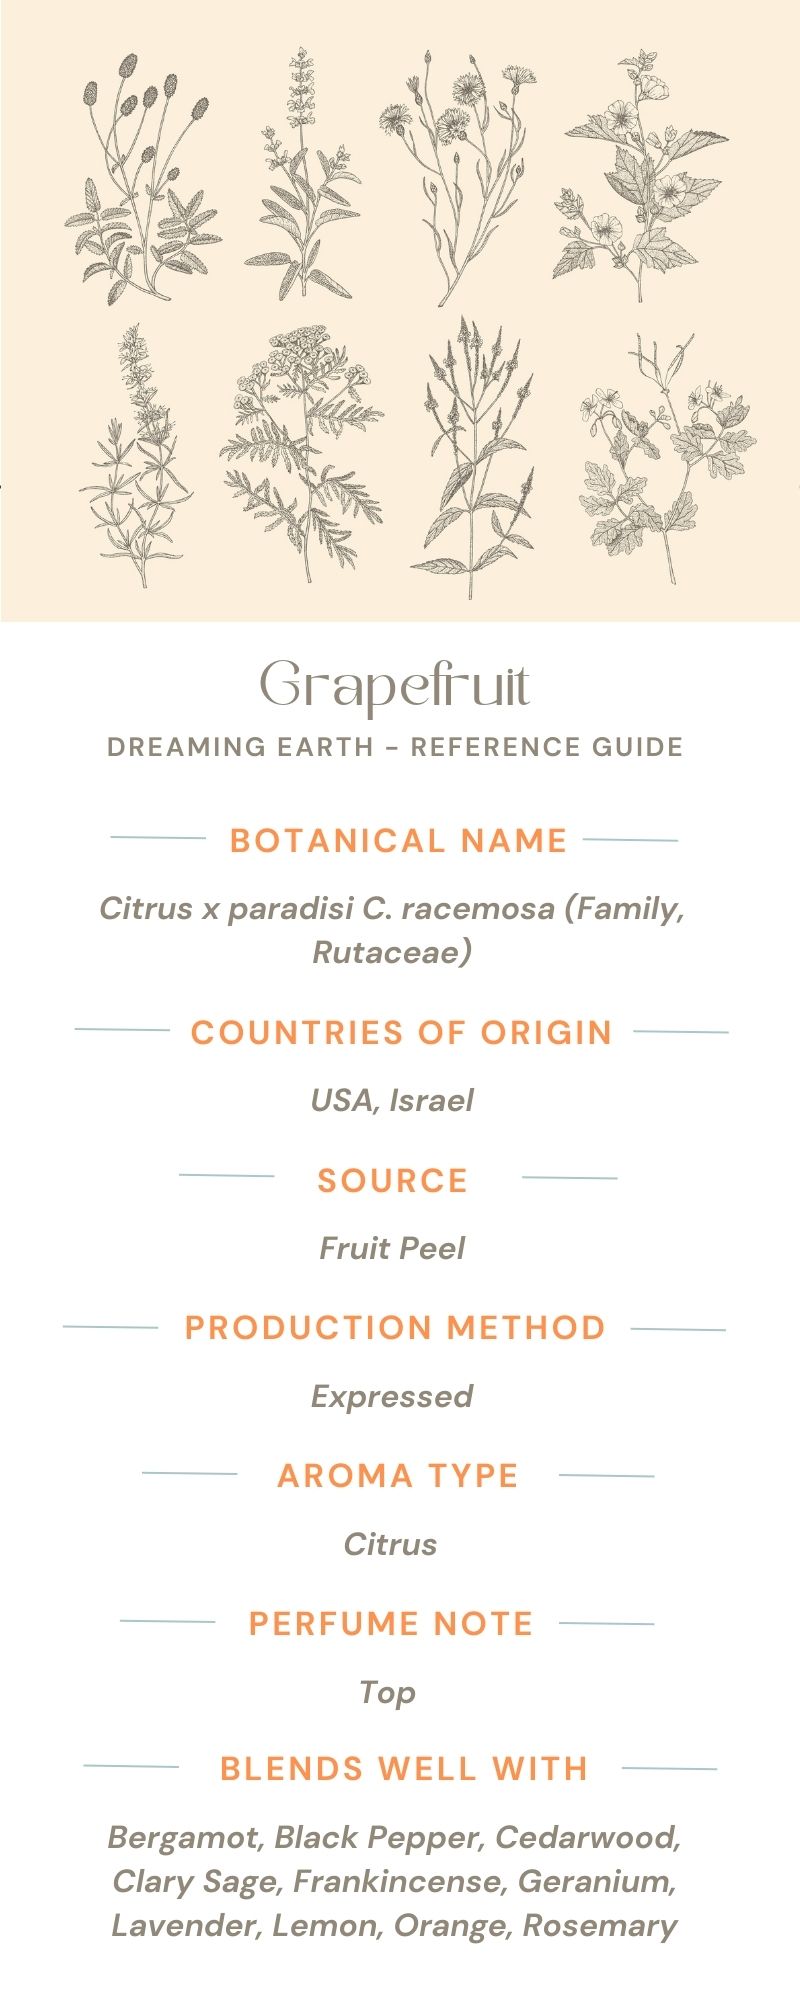 Load image into Gallery viewer, Grapefruit Essential Oil, Pink - Dreaming Earth Inc
